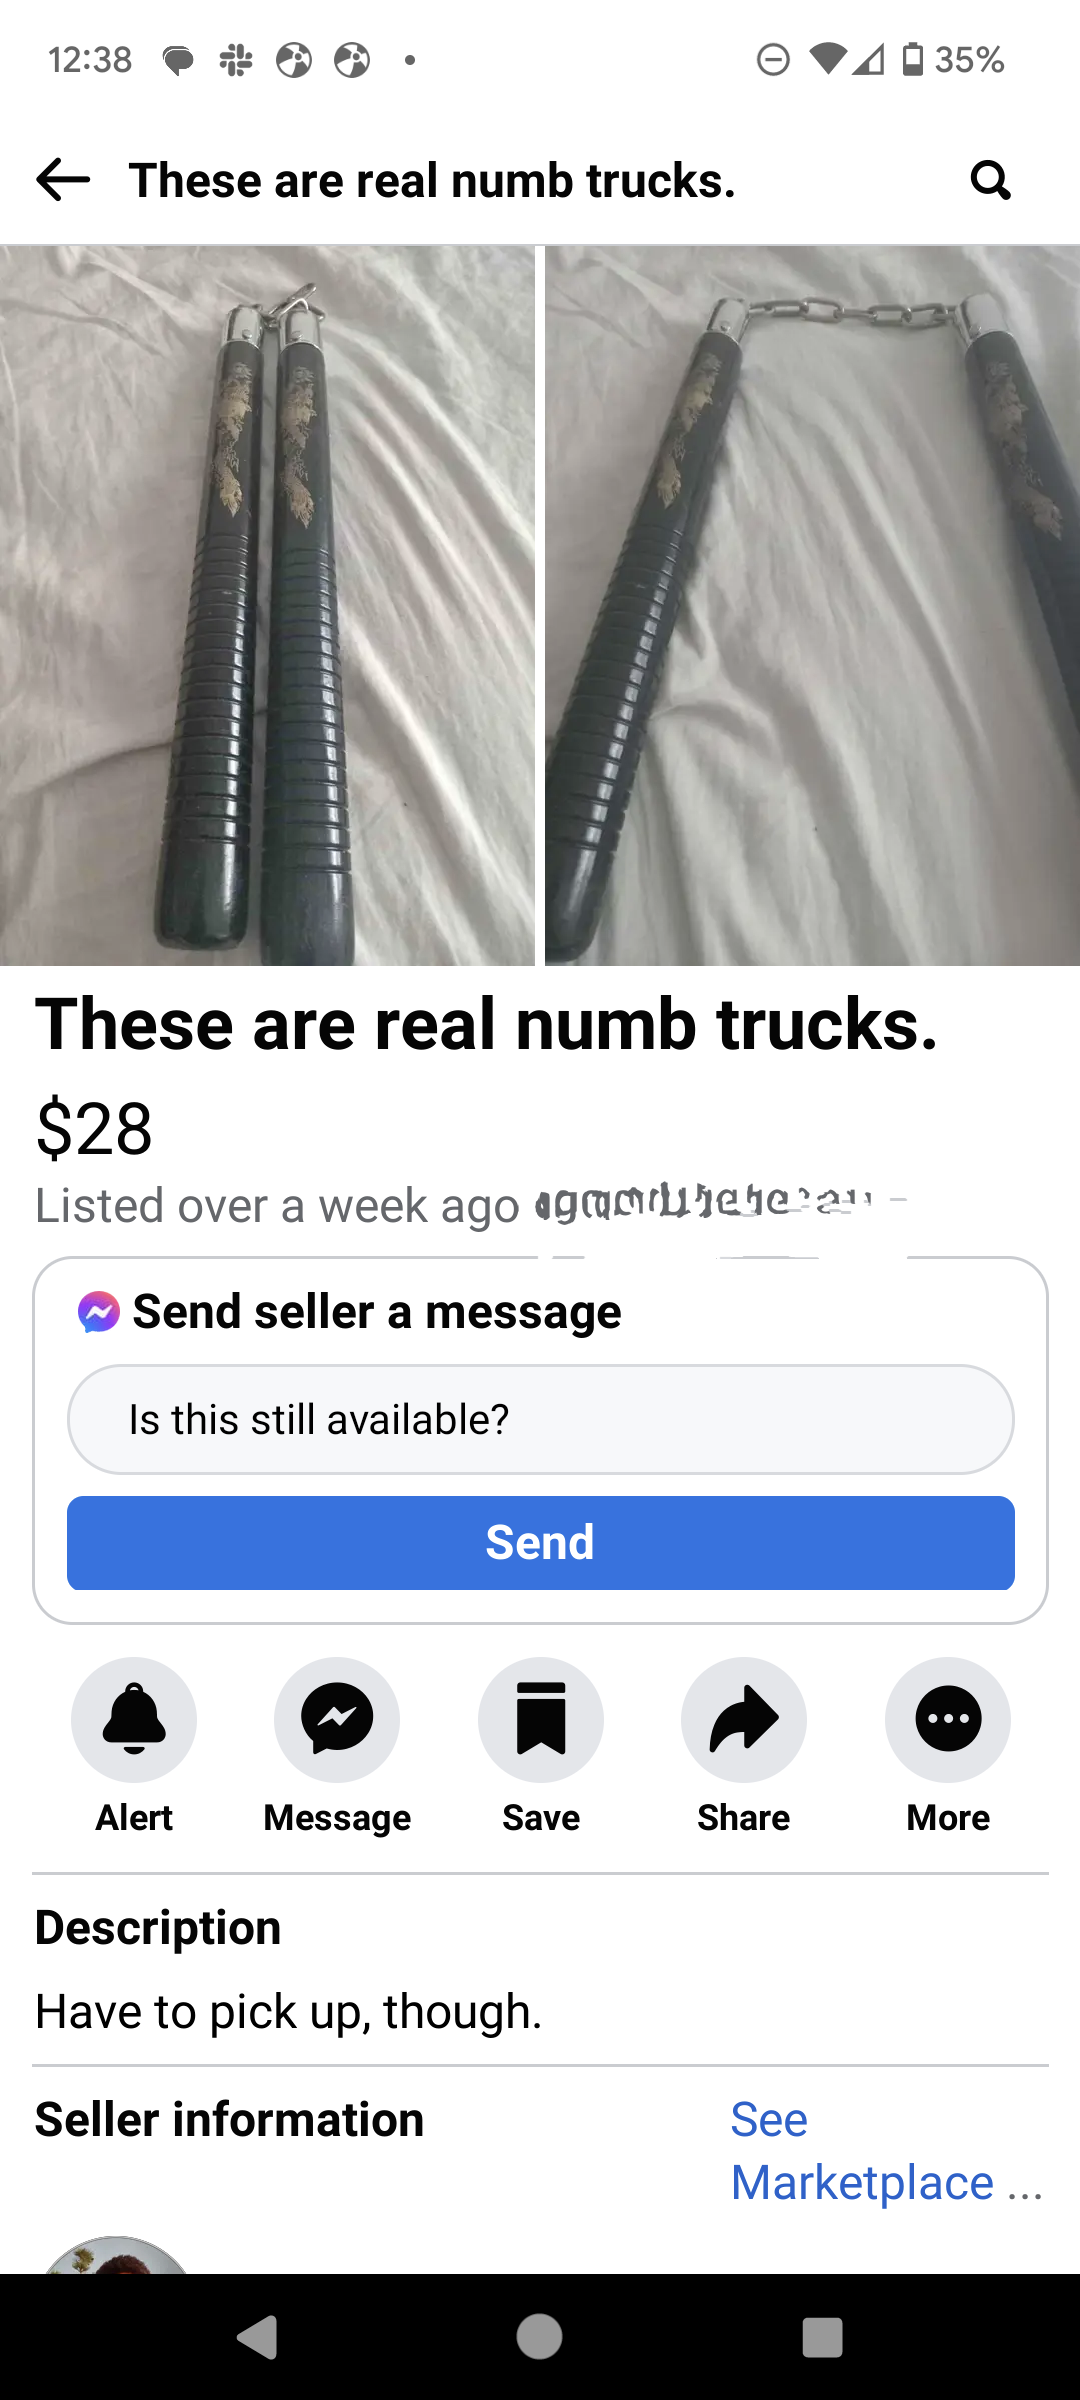 &quot;These are real numb trucks.&quot;